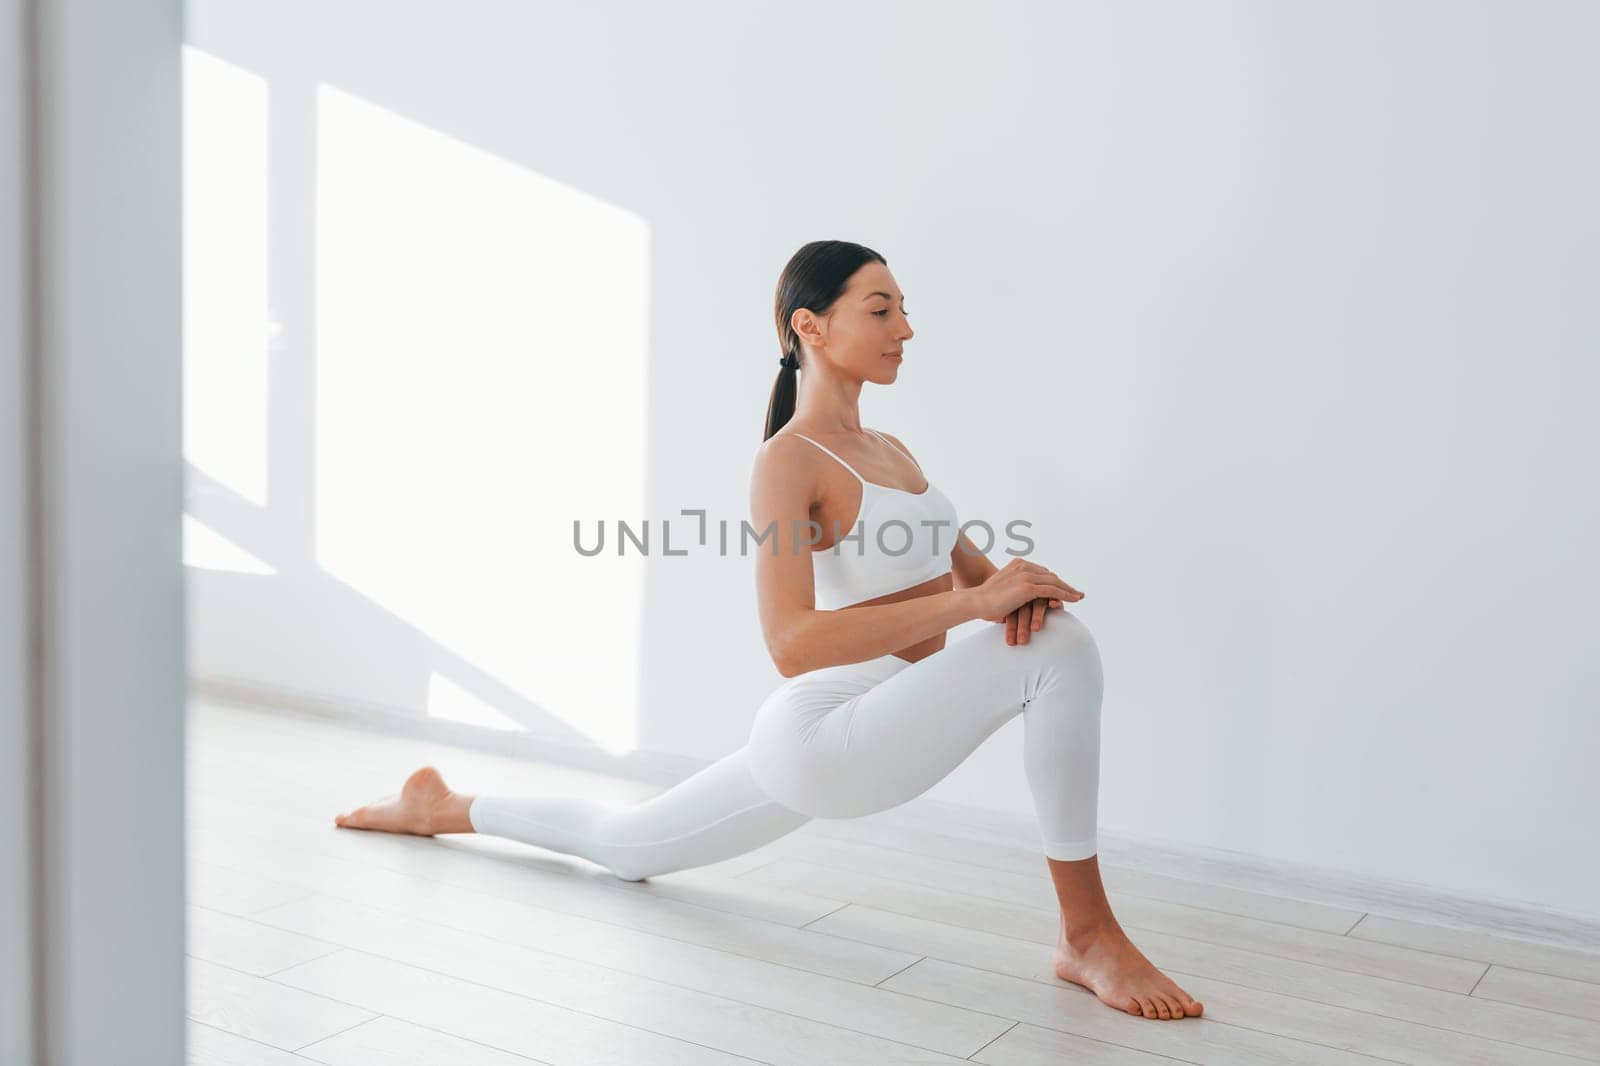 Doing yoga. Young caucasian woman with slim body shape is indoors at daytime.